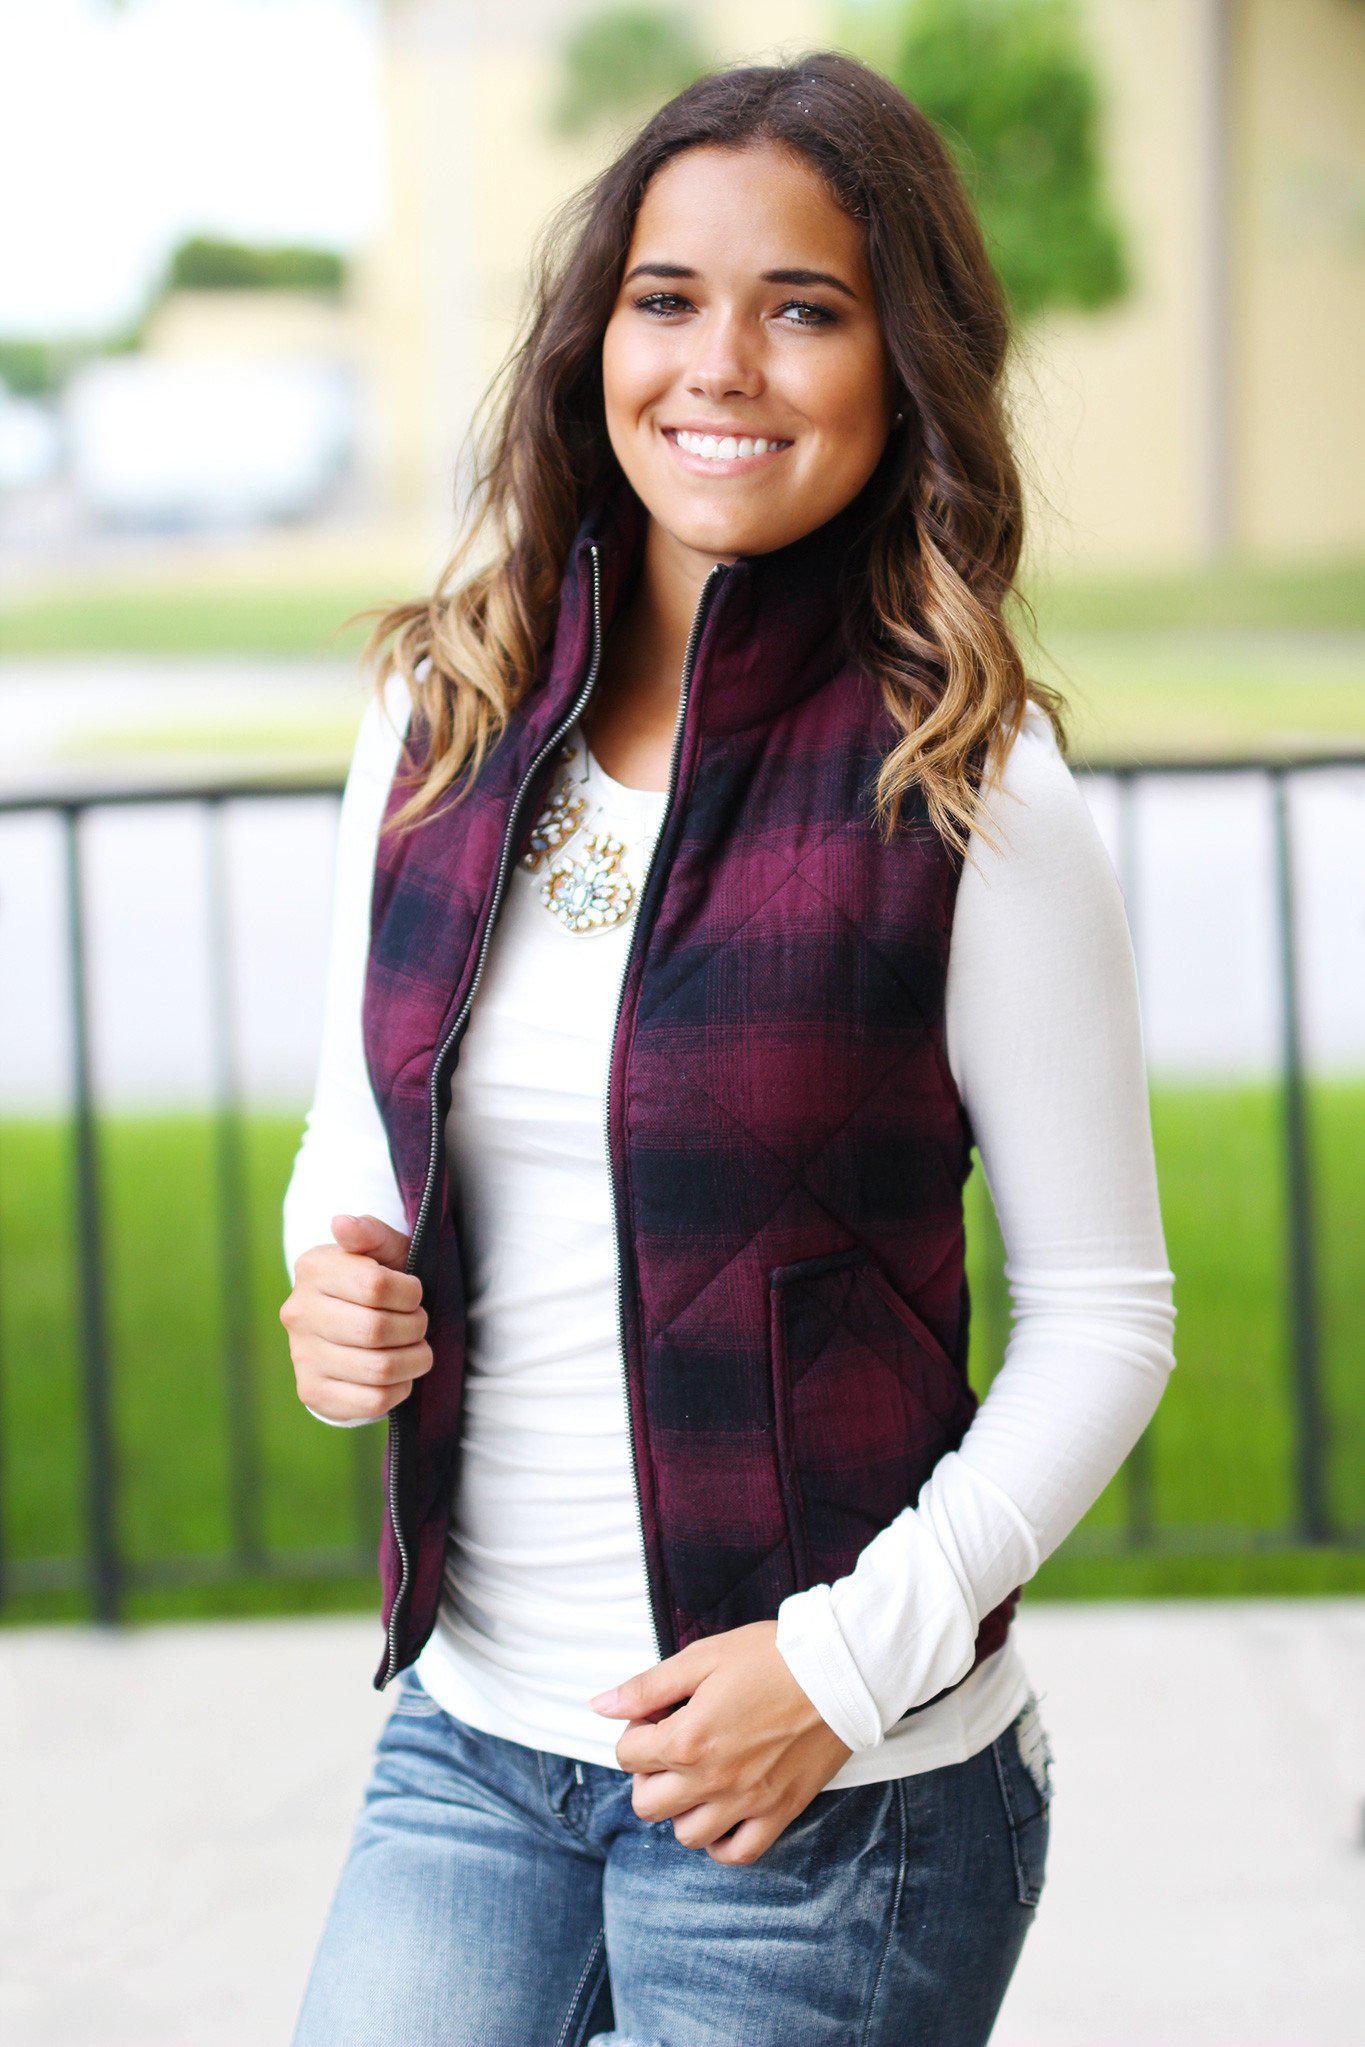 Plum and Black Flannel Vest With Pockets